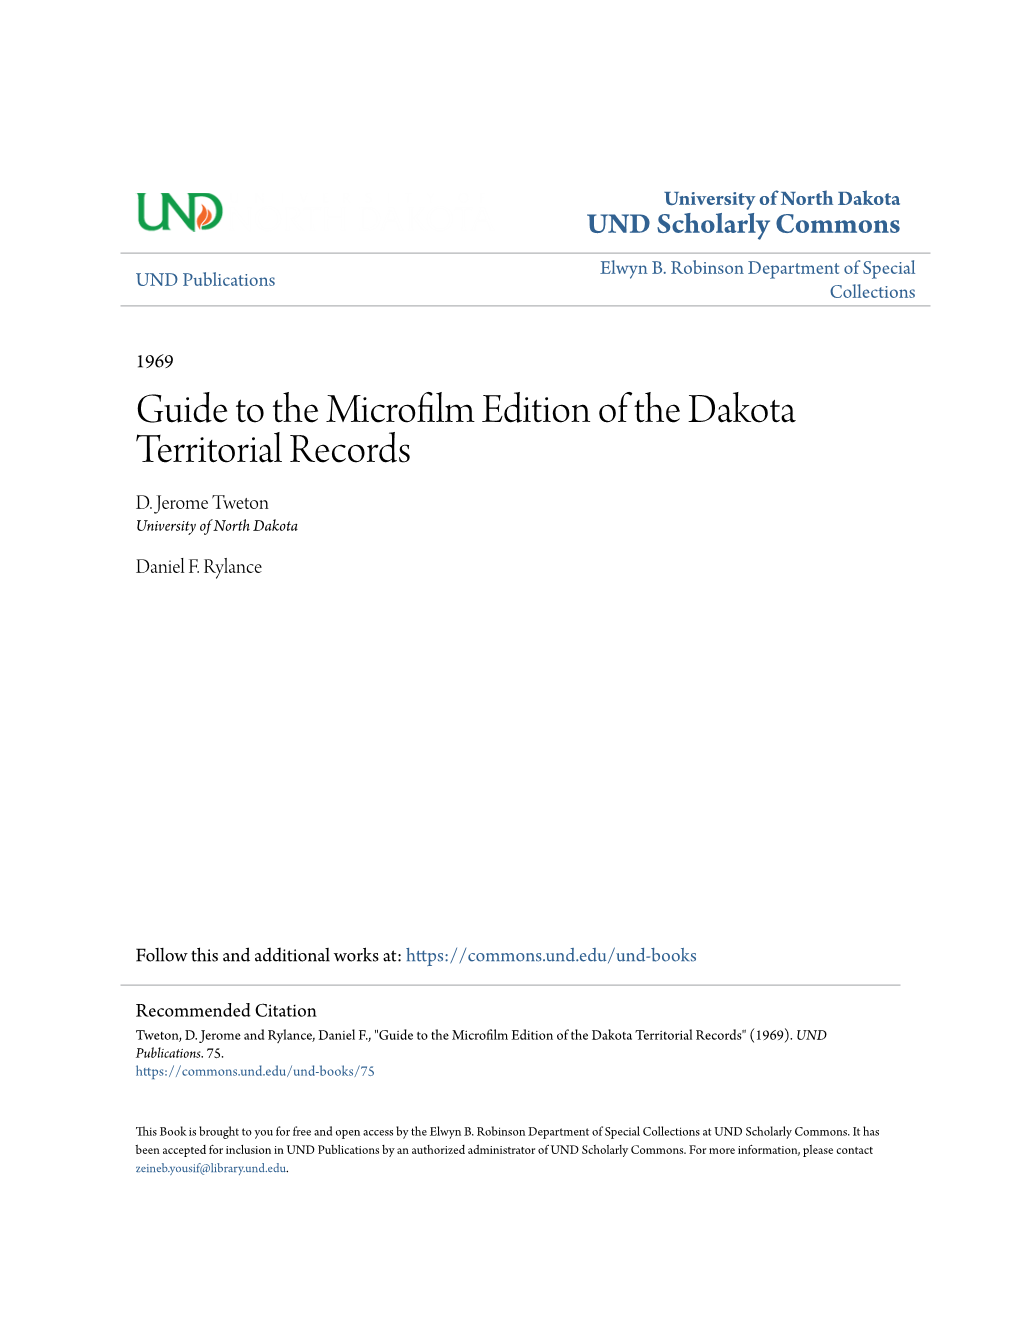 Guide to the Microfilm Edition of the Dakota Territorial Records D